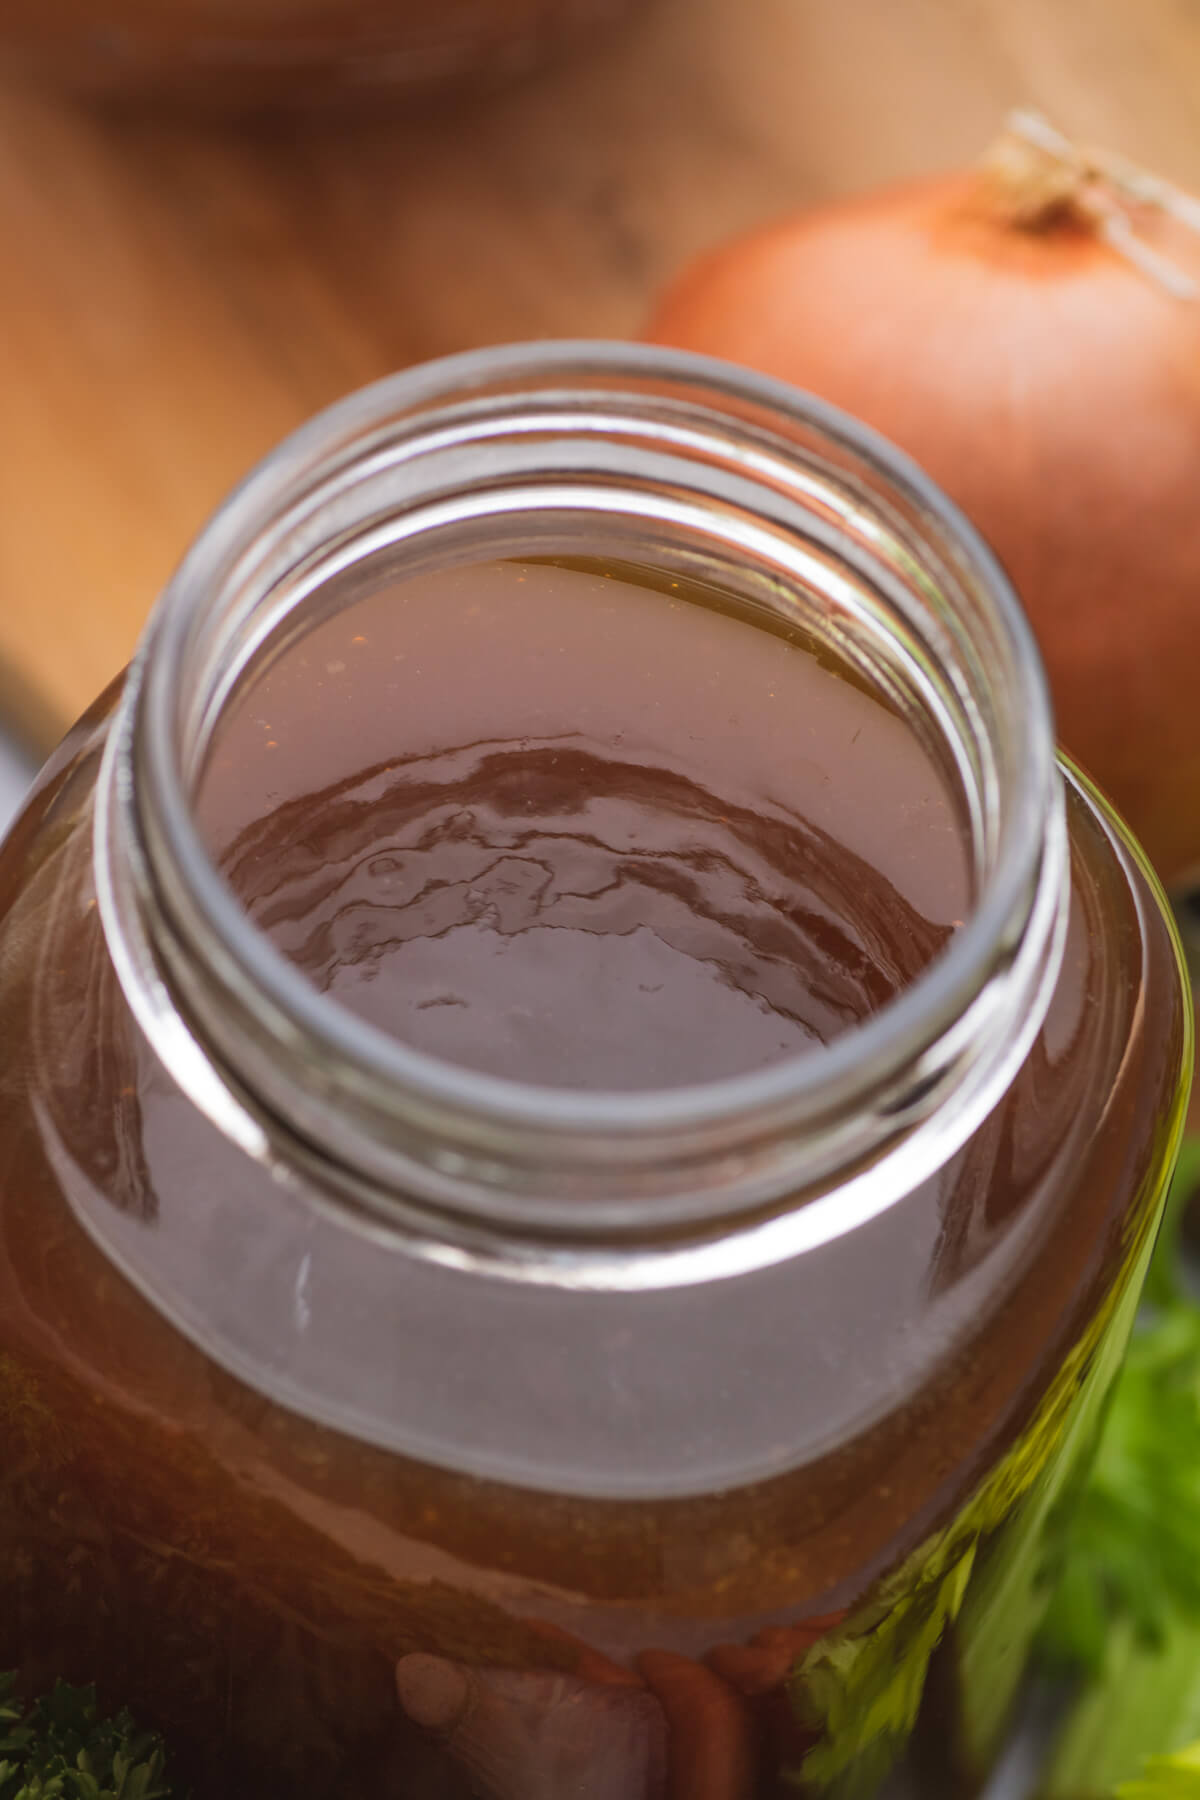 A quart jar filled with jelly-like cold beef stock.